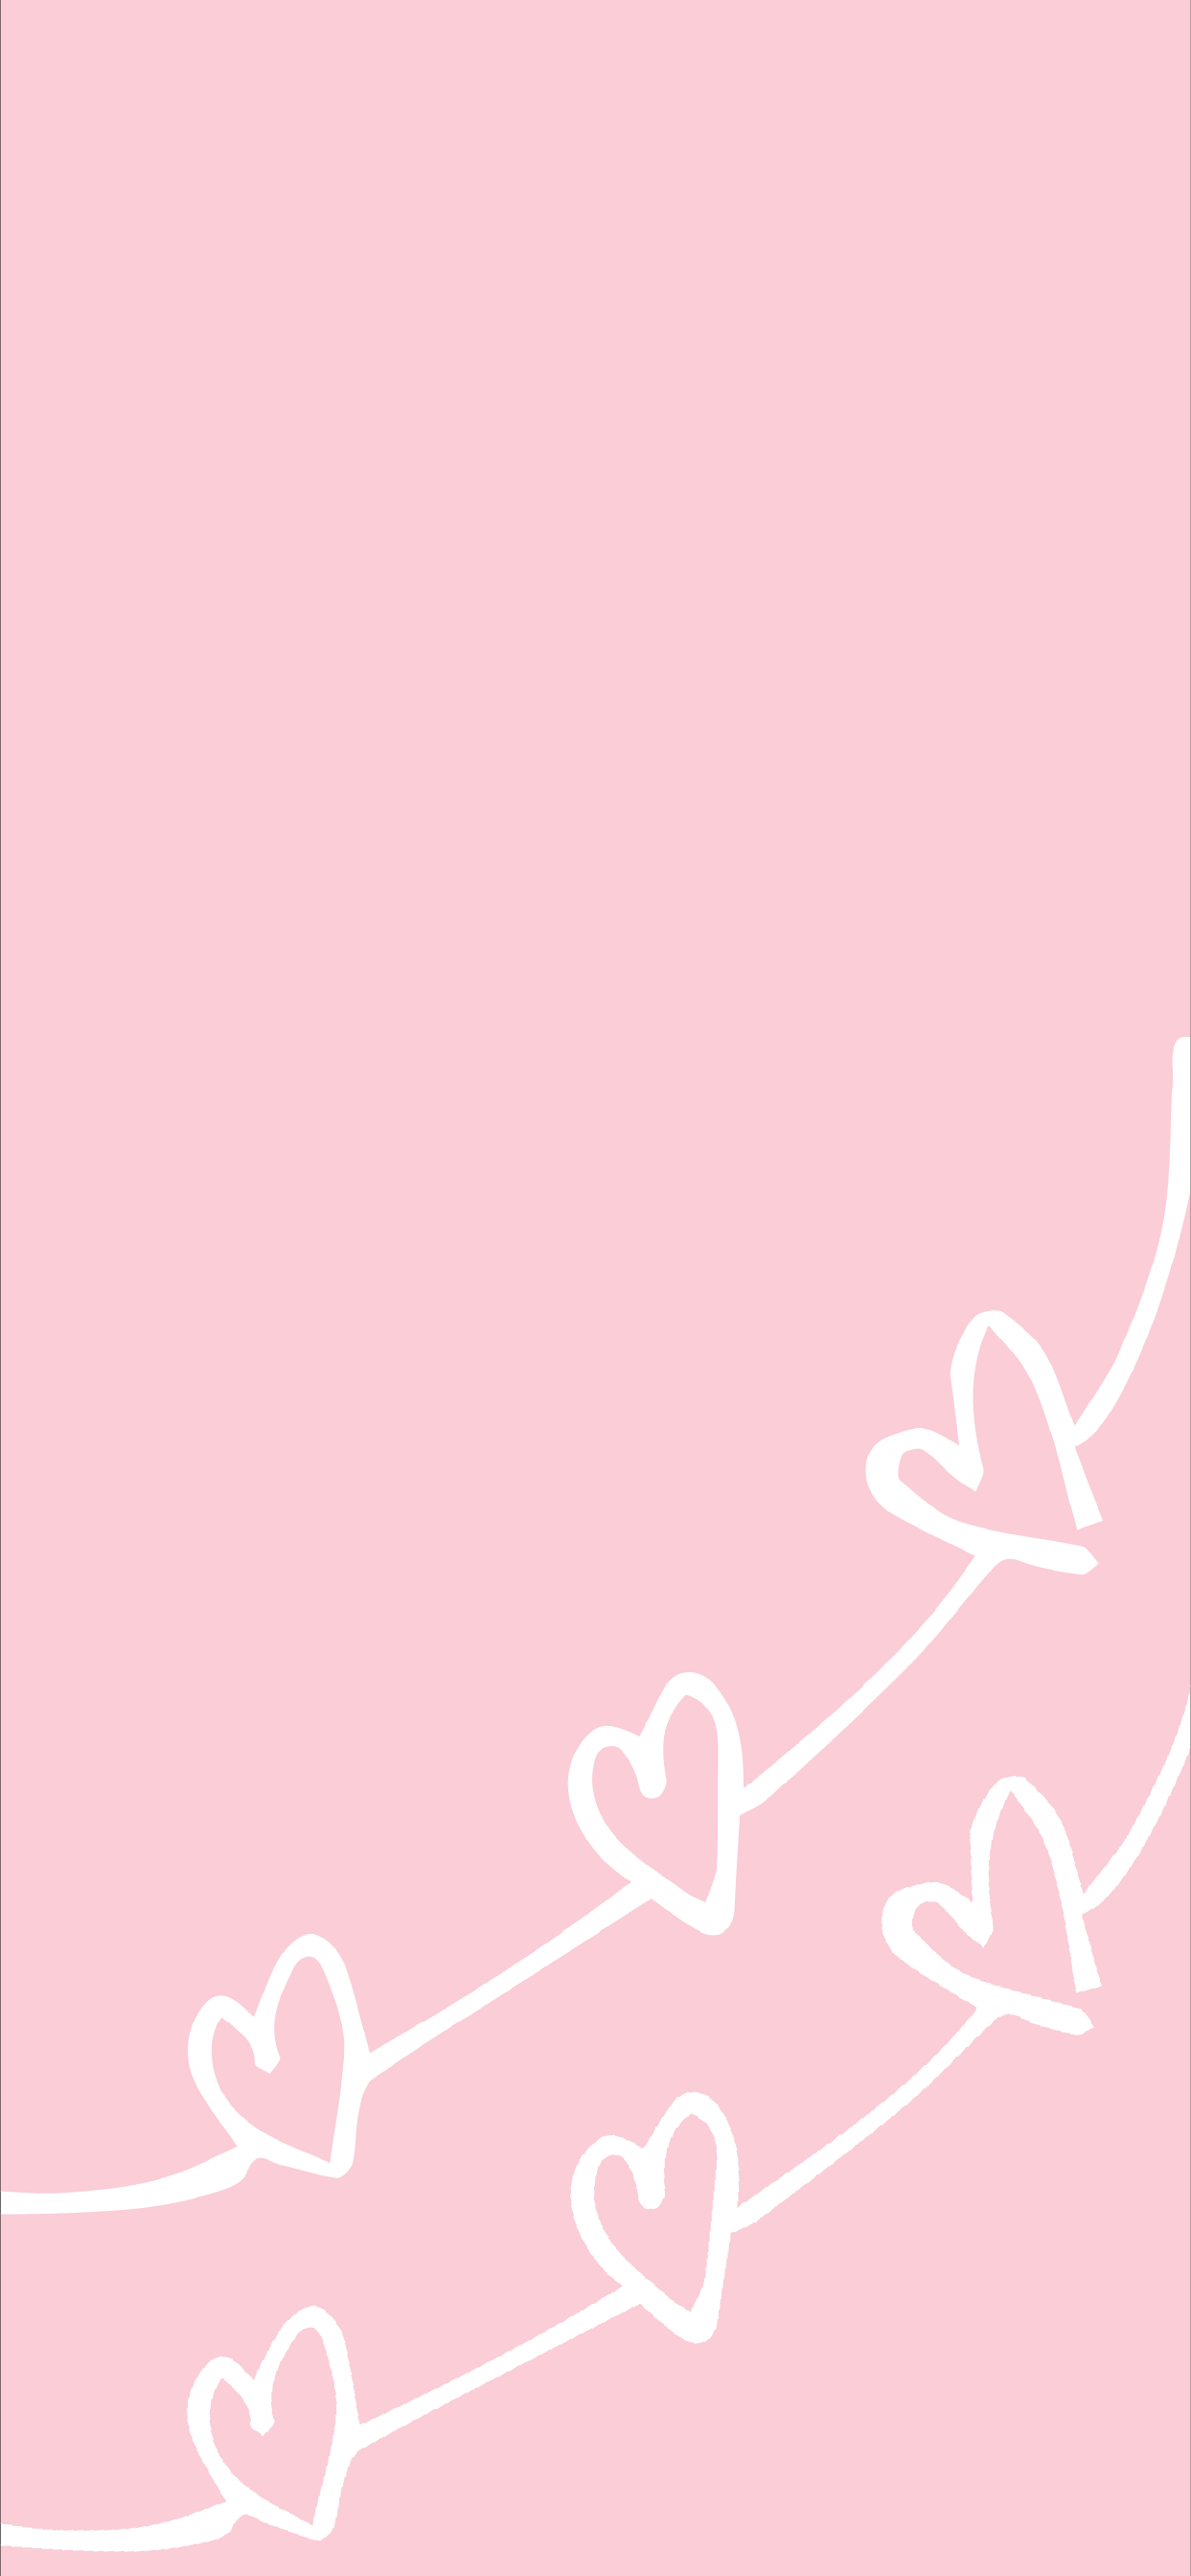 50 Free Valentines Day Aesthetic Wallpaper For Your Phone